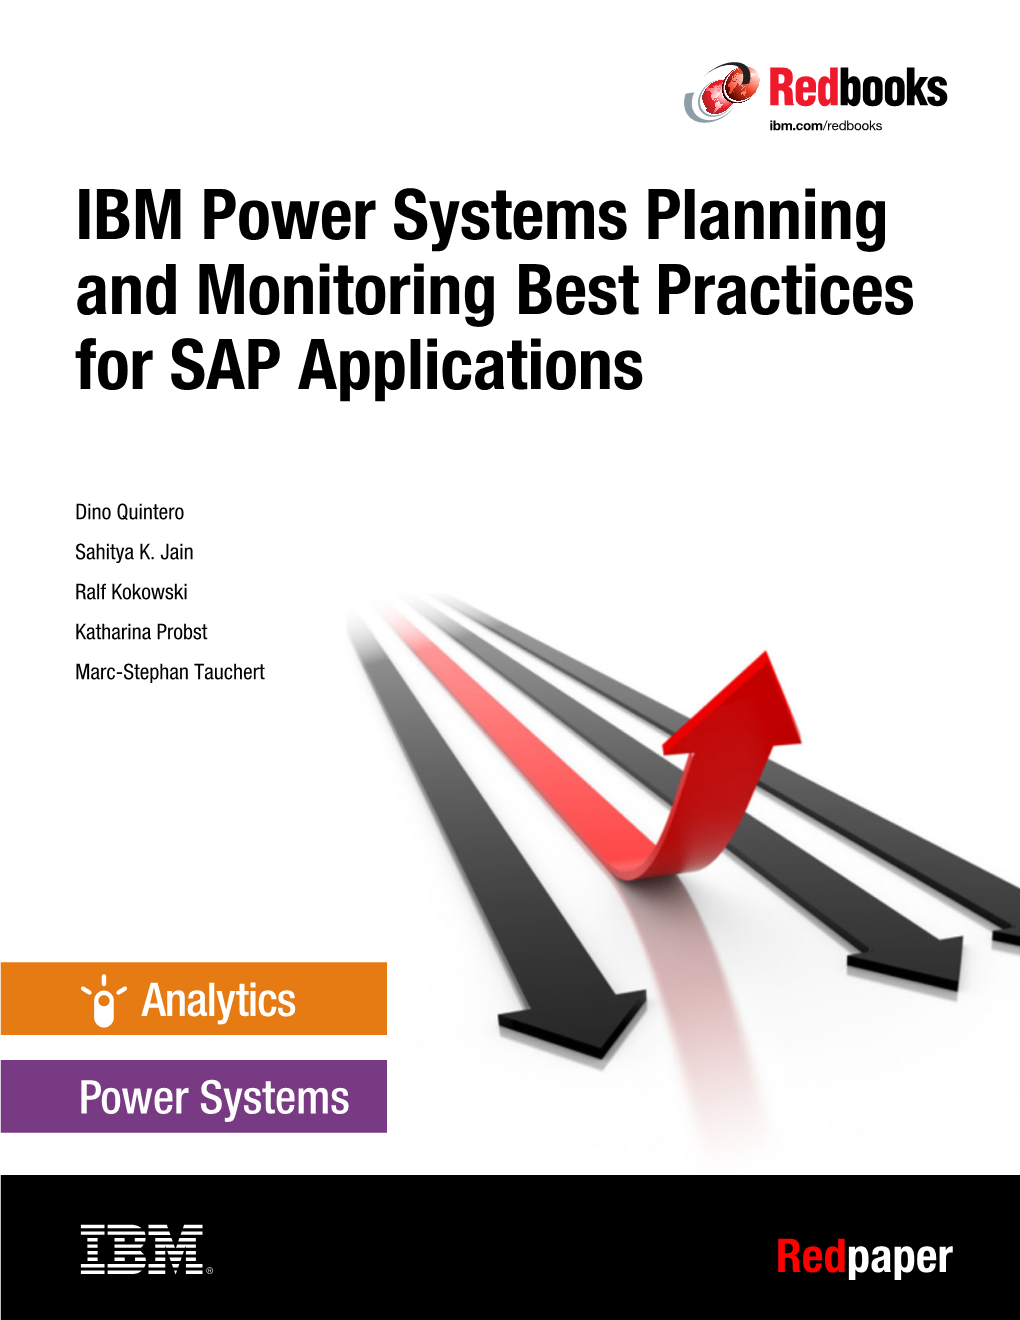 IBM Power Systems Planning and Monitoring Best Practices for SAP Applications